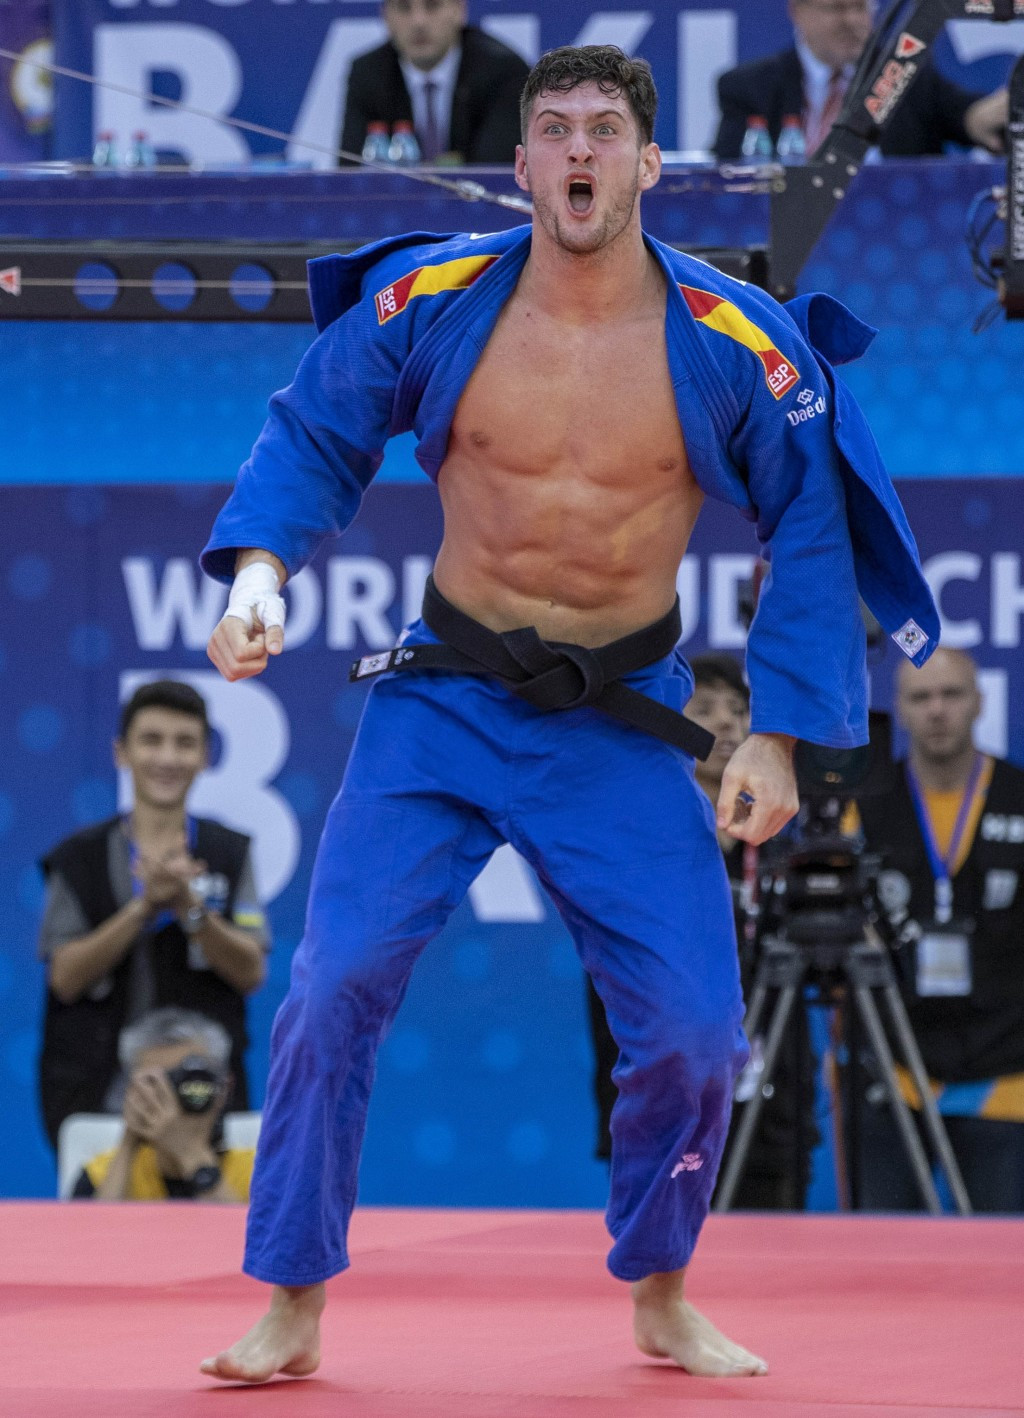 Sherazadishvili defeated Cuba's Ivan Felipe Silva Morales to secure the gold medal in a compelling contest ©IJF